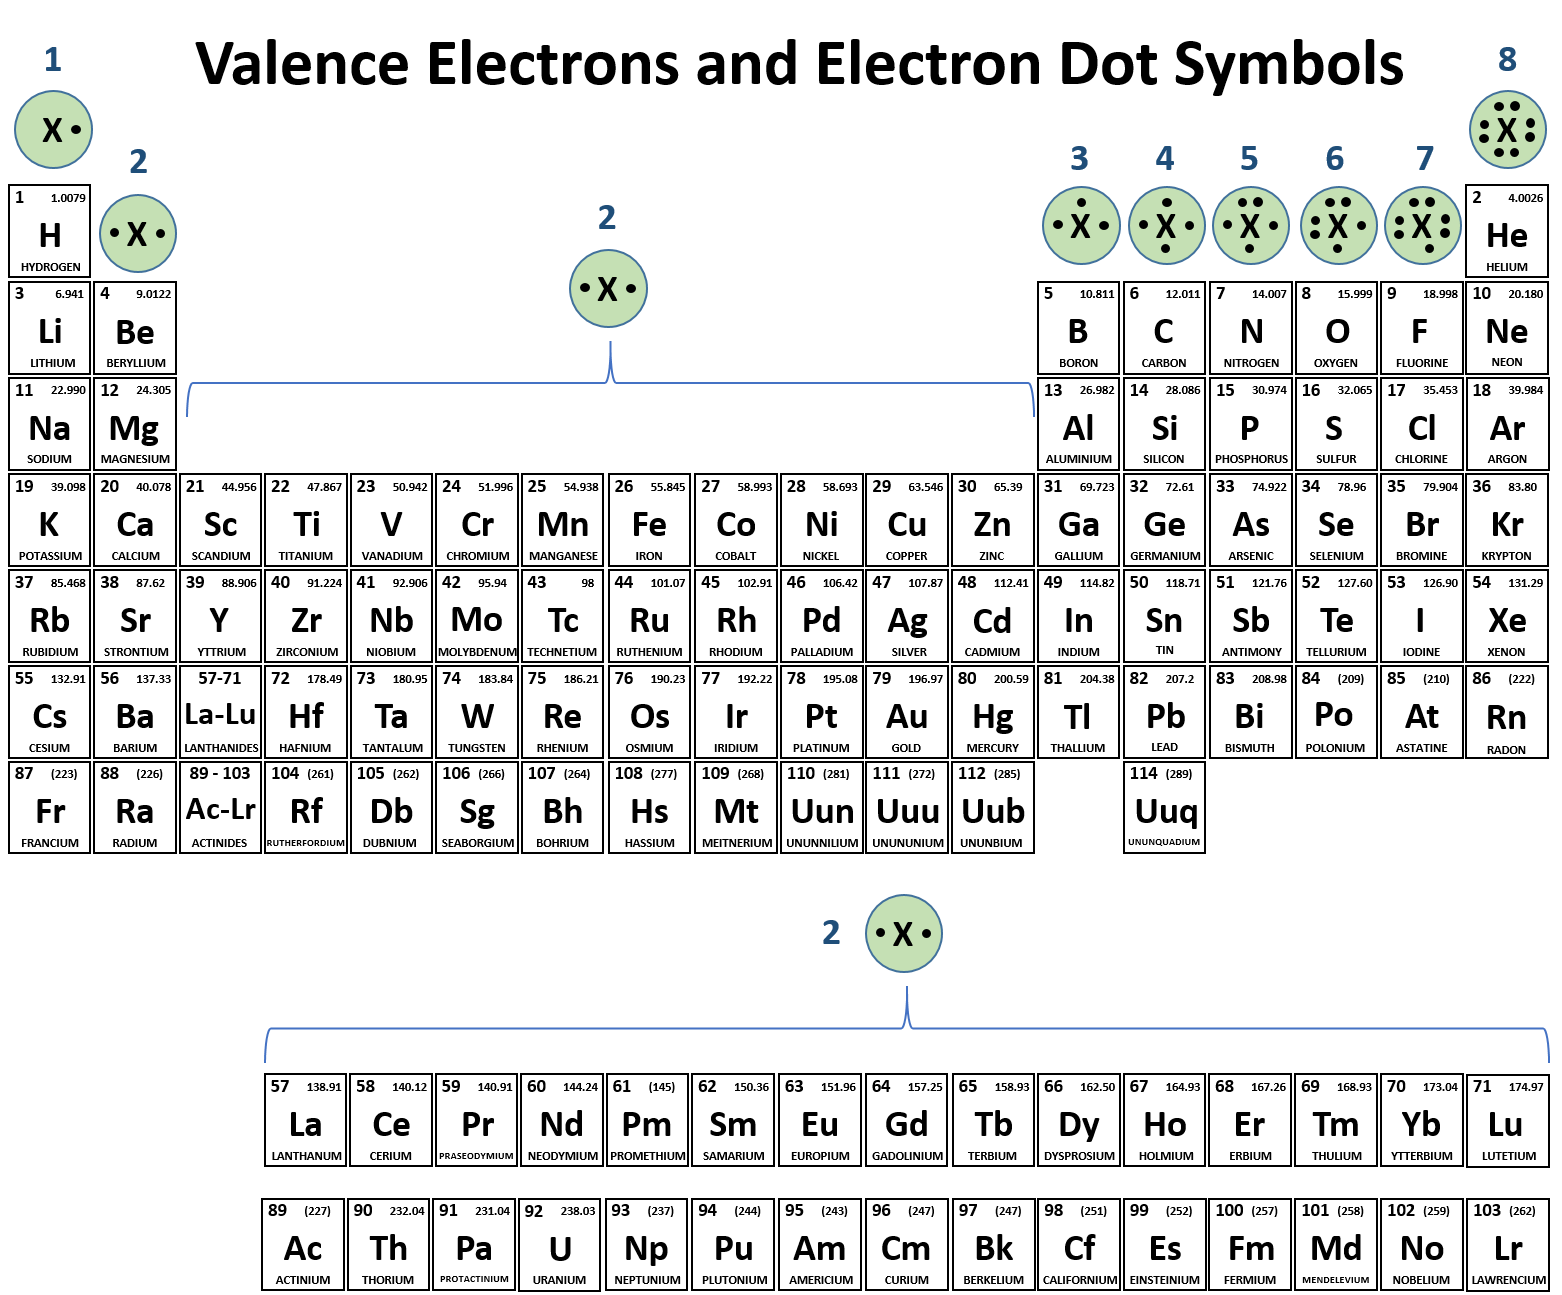 periodic table with names and symbols and charges